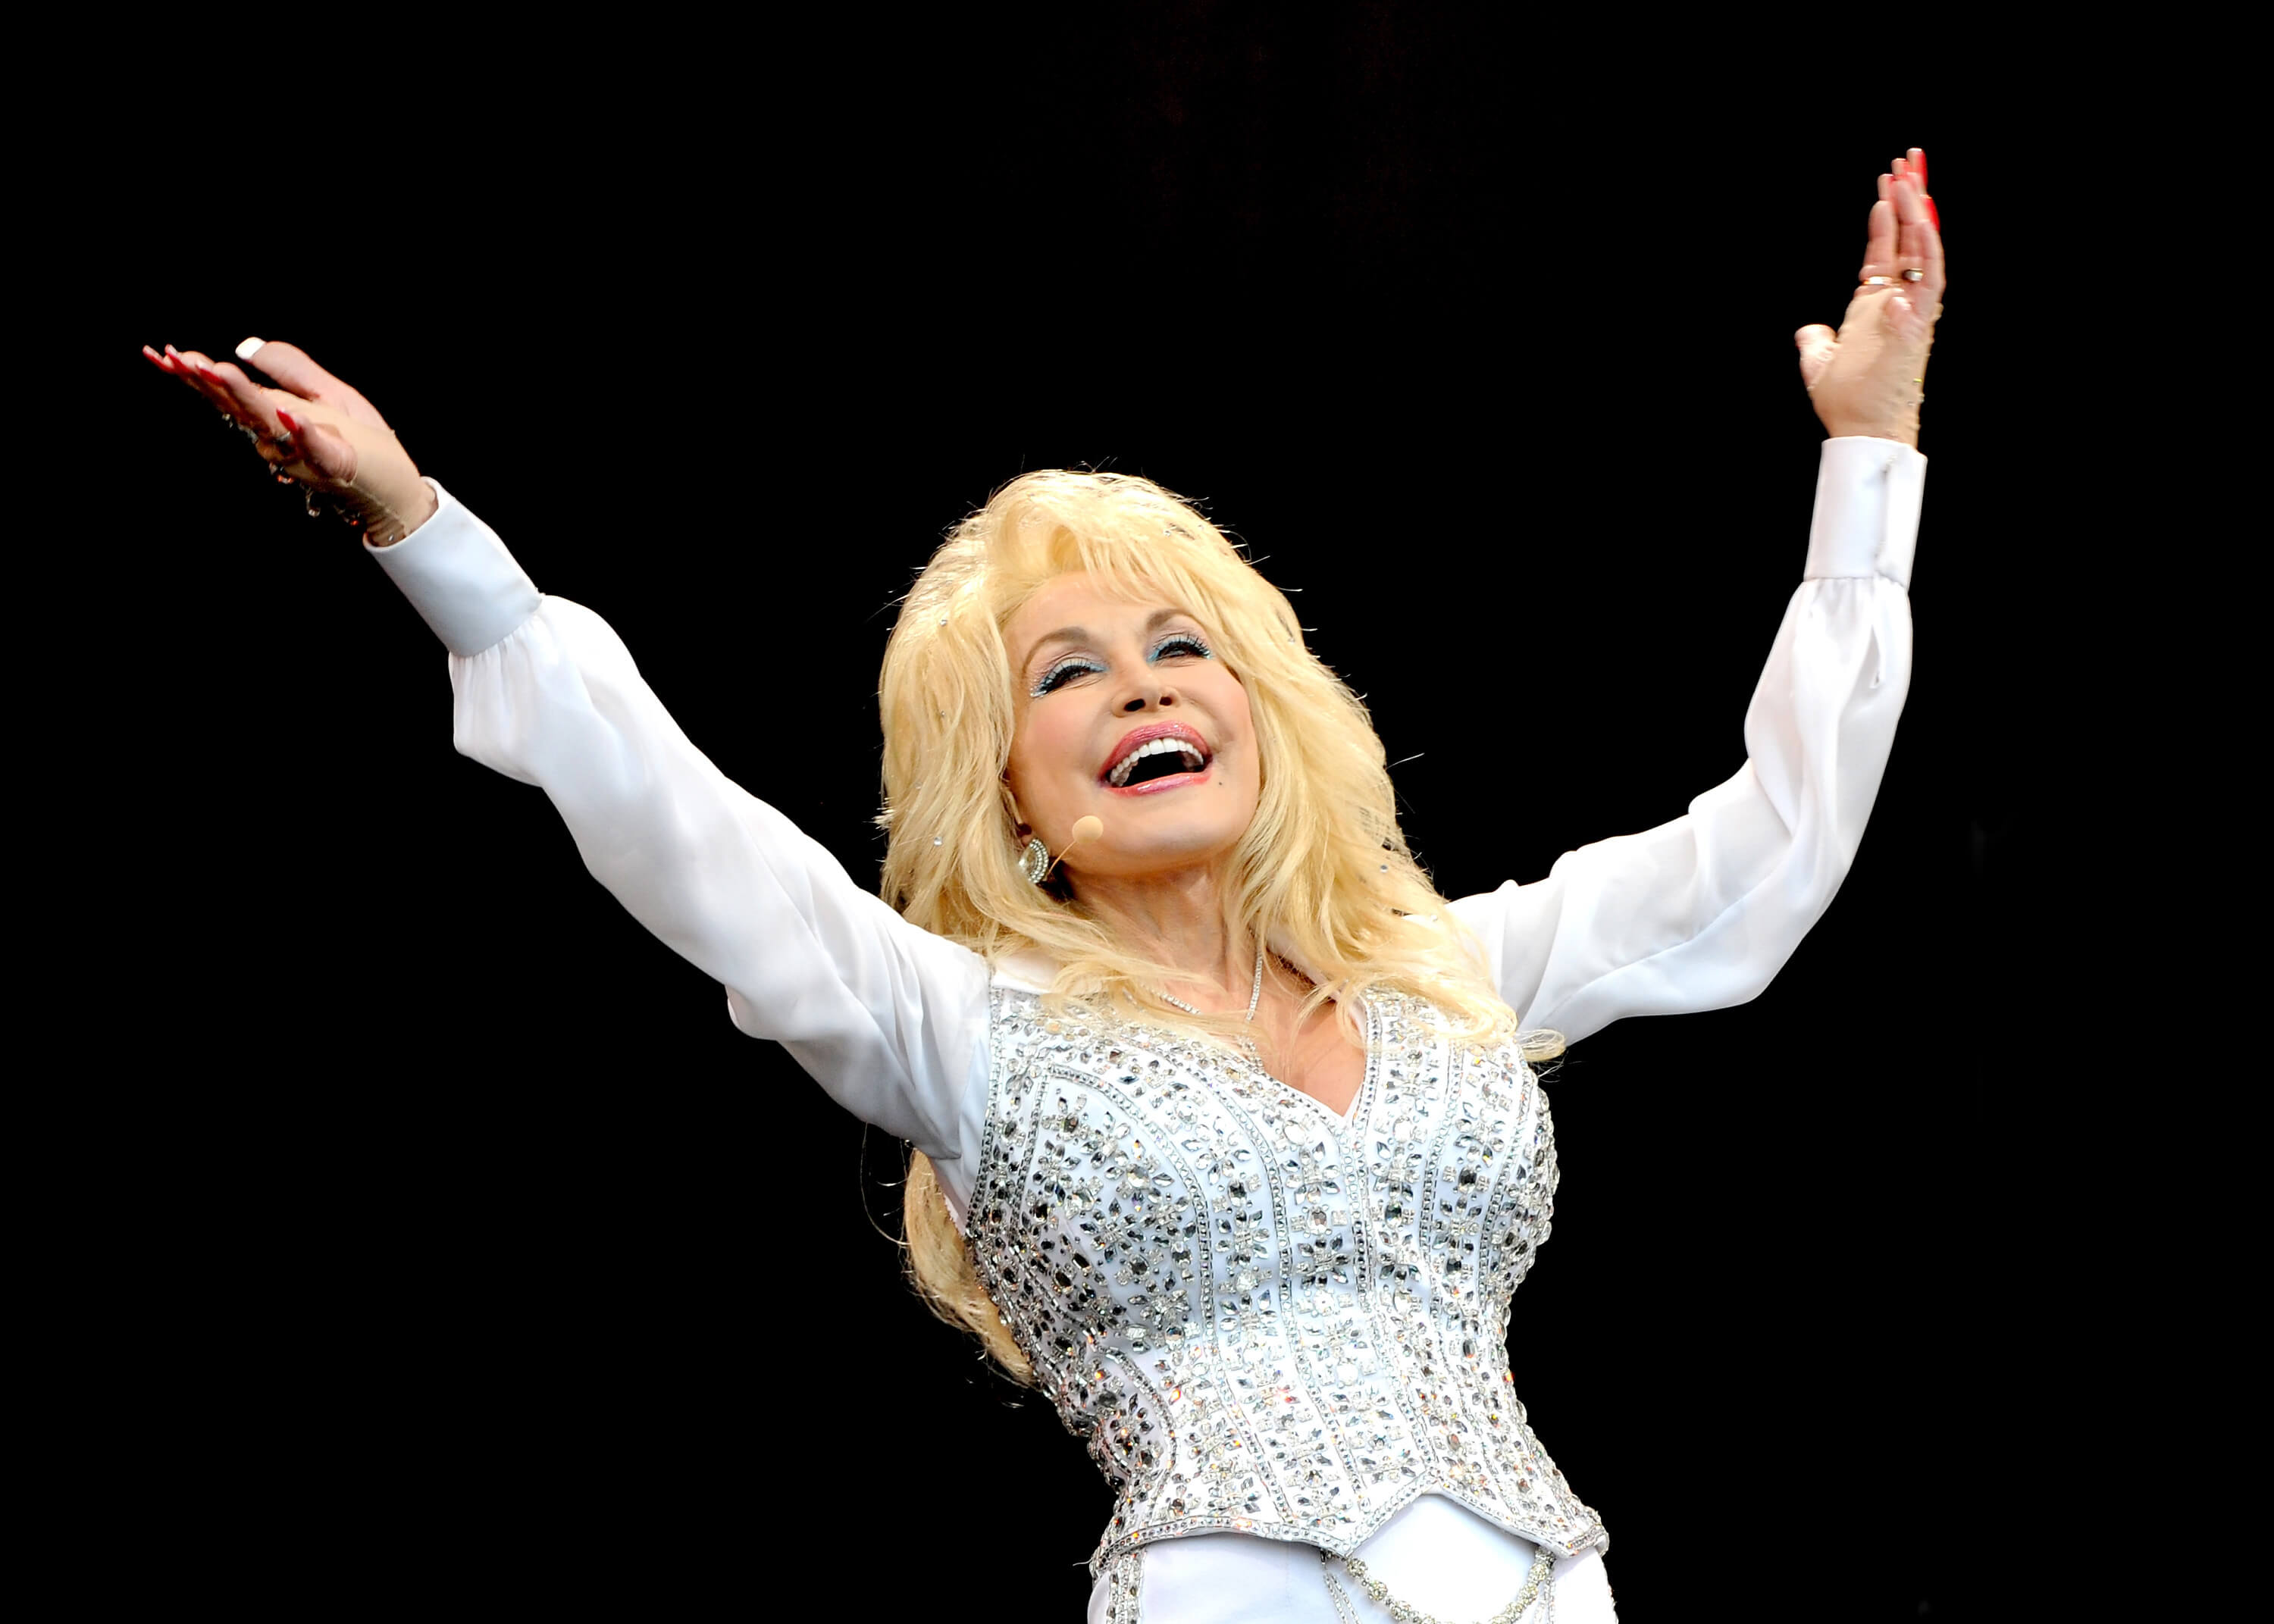 Dolly Parton performs on The Pyramid Stage on Day 3 of the Glastonbury Festival